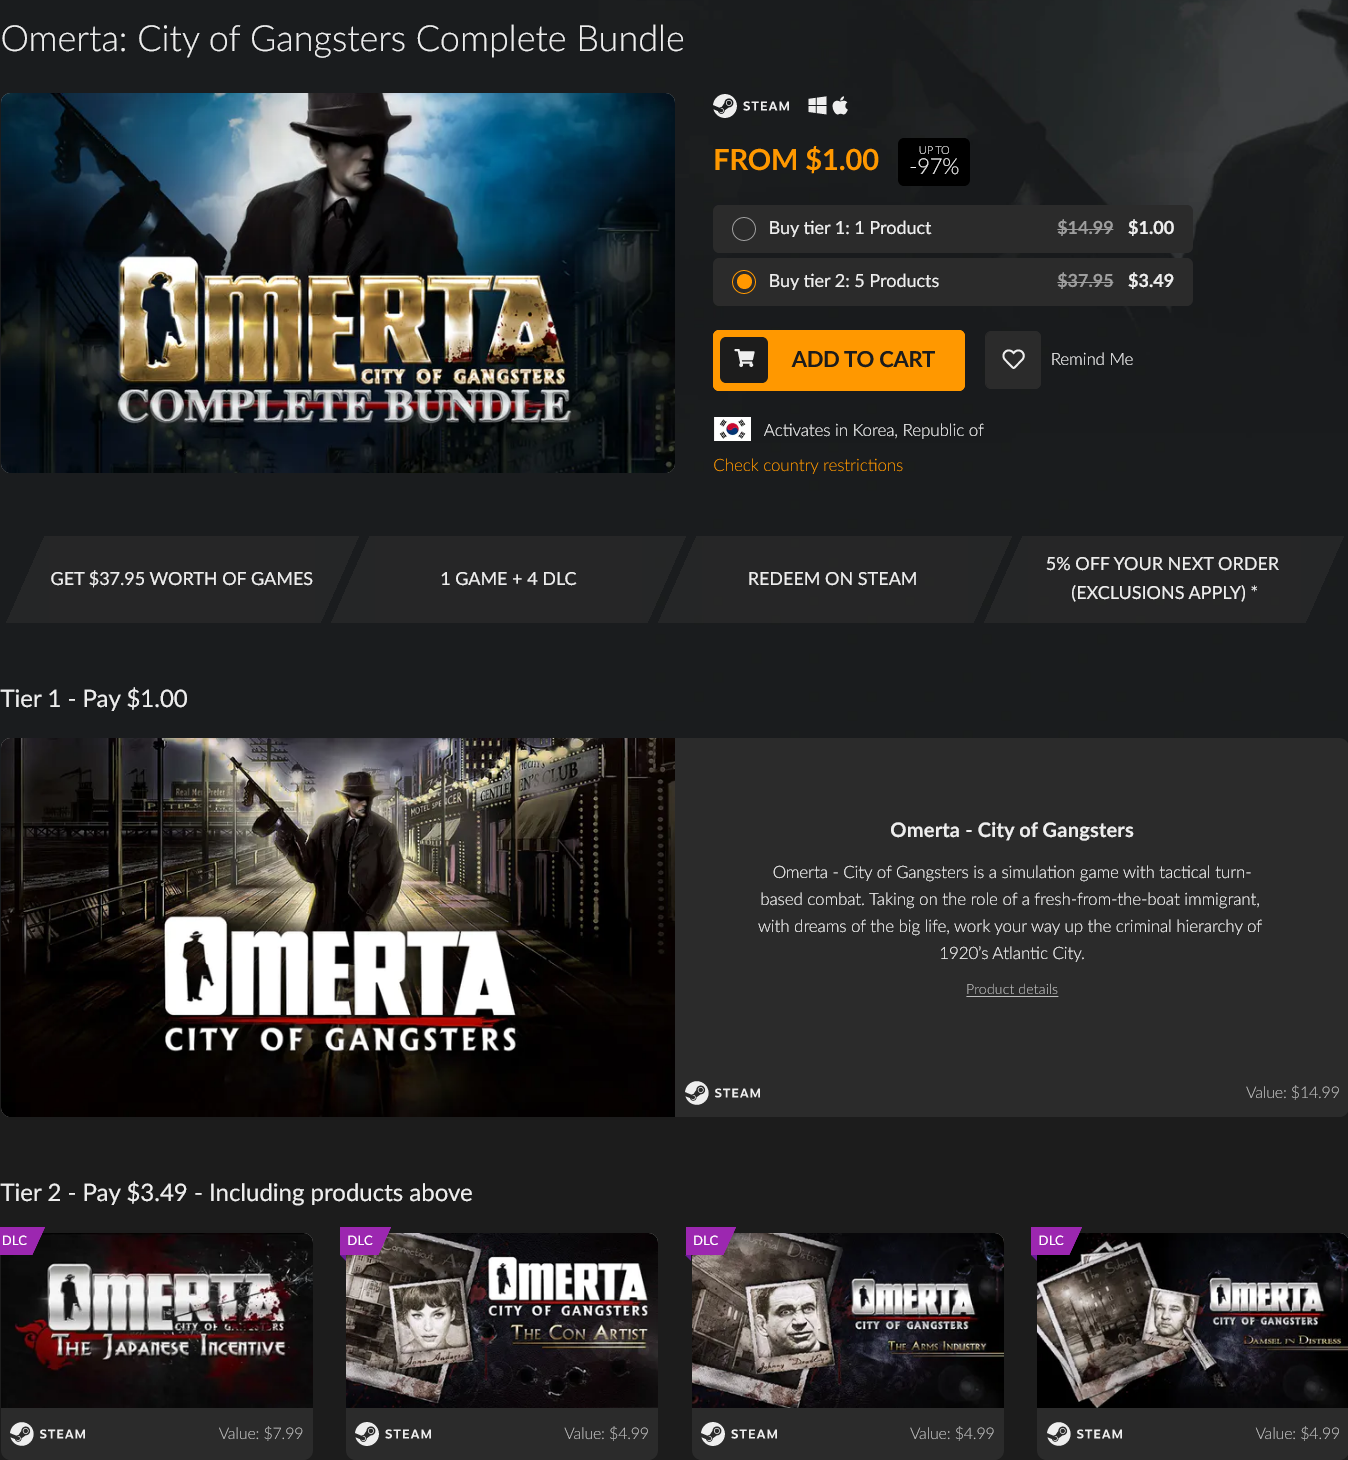 Screenshot_2021-04-16 Omerta City of Gangsters Complete Bundle Steam Game Bundle Fanatical.png